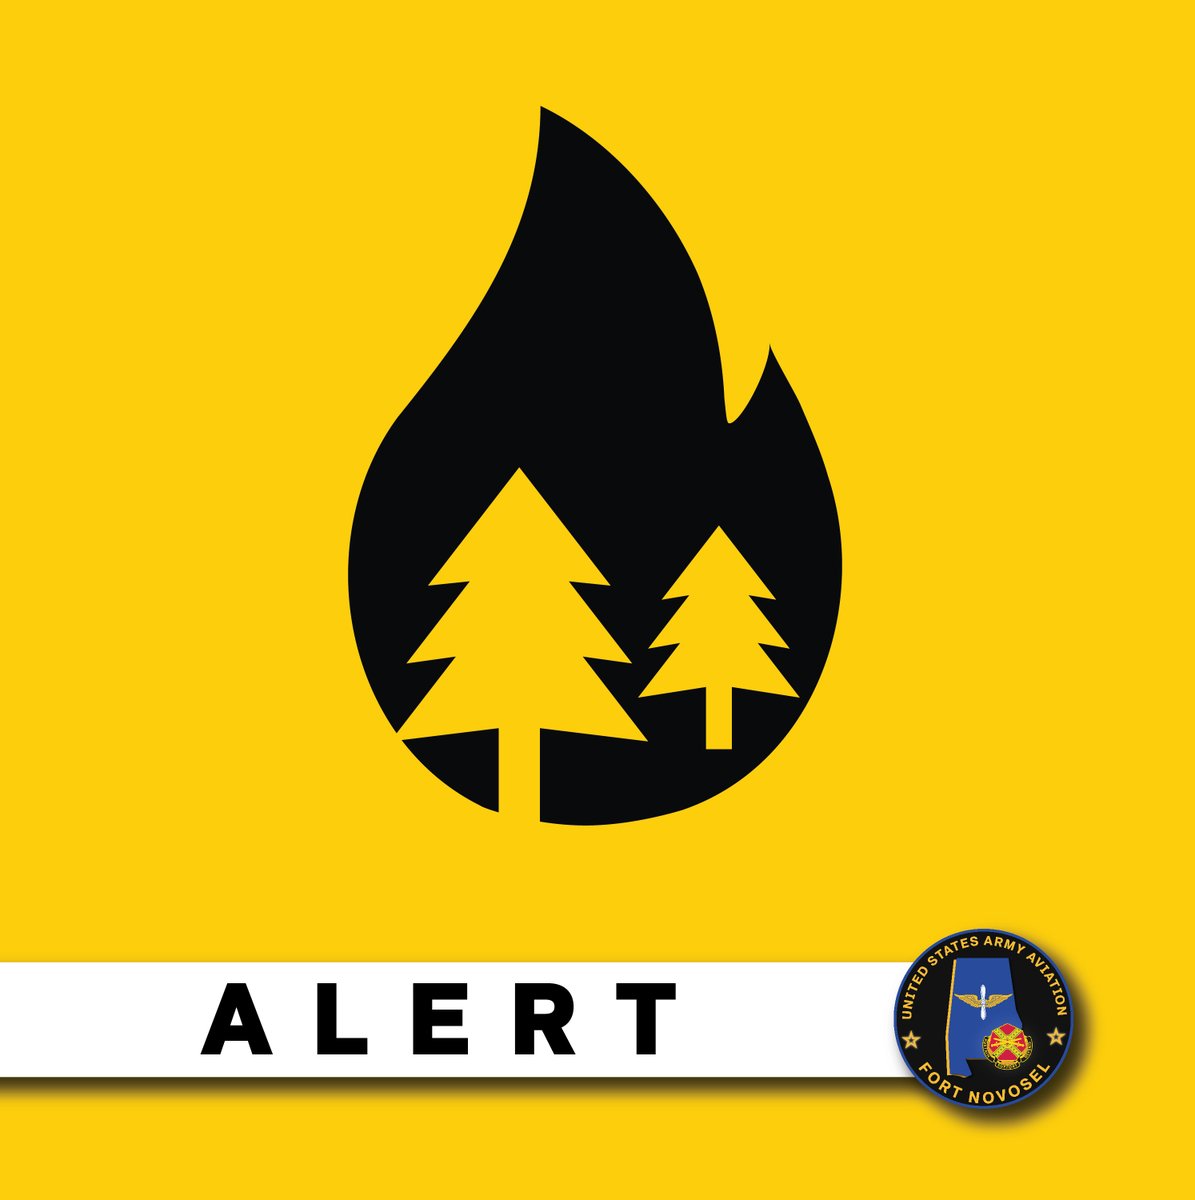 Fort Novosel will conduct a prescribed burn today on post. Extensive planning has been completed for this operation to ensure all safety concerns have been reviewed. Please be aware of potential smoke in the area.